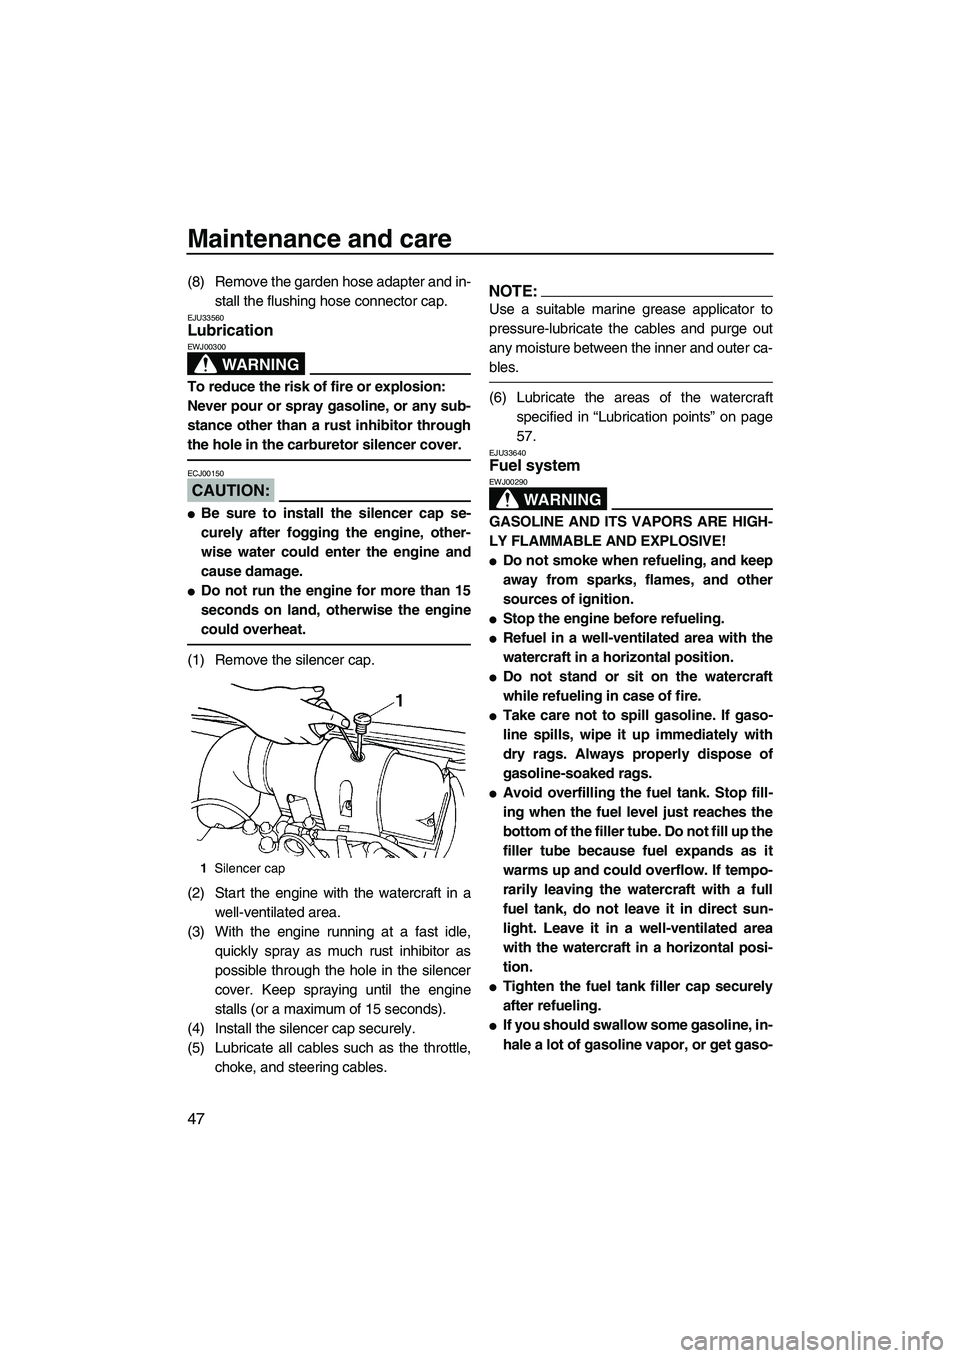 YAMAHA SUPERJET 2007  Owners Manual Maintenance and care
47
(8) Remove the garden hose adapter and in-
stall the flushing hose connector cap.
EJU33560Lubrication 
WARNING
EWJ00300
To reduce the risk of fire or explosion:
Never pour or s